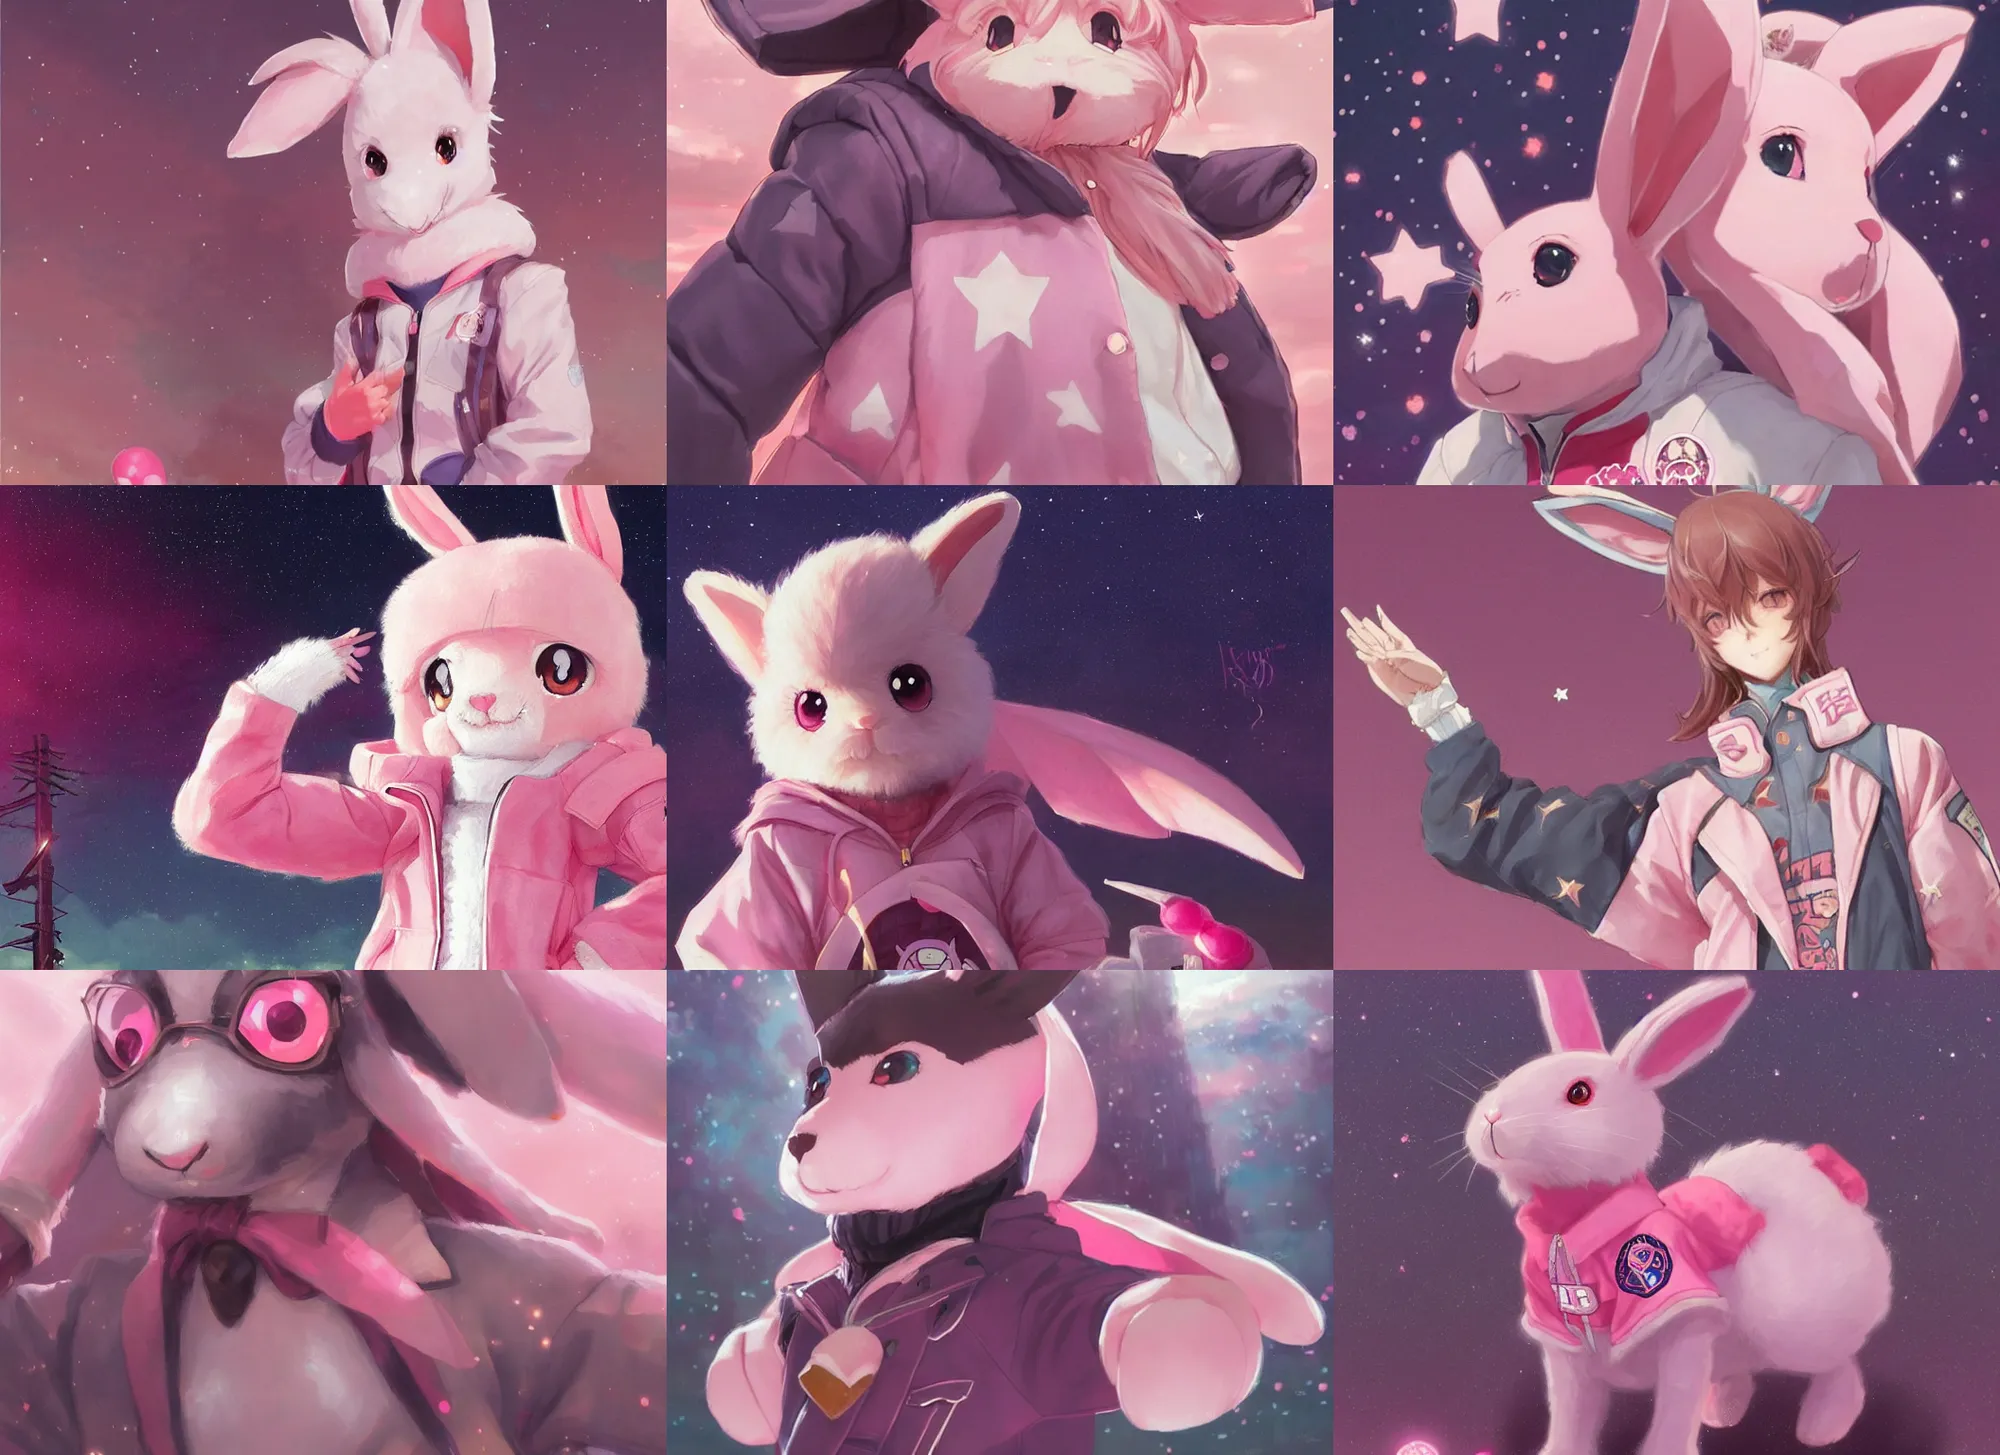 Prompt: official artwork of a pink rabbit wearing a letterman jacket, by Krenz Cushart, detailed art, many stars in the night sky, pink iconic character, wallpaper